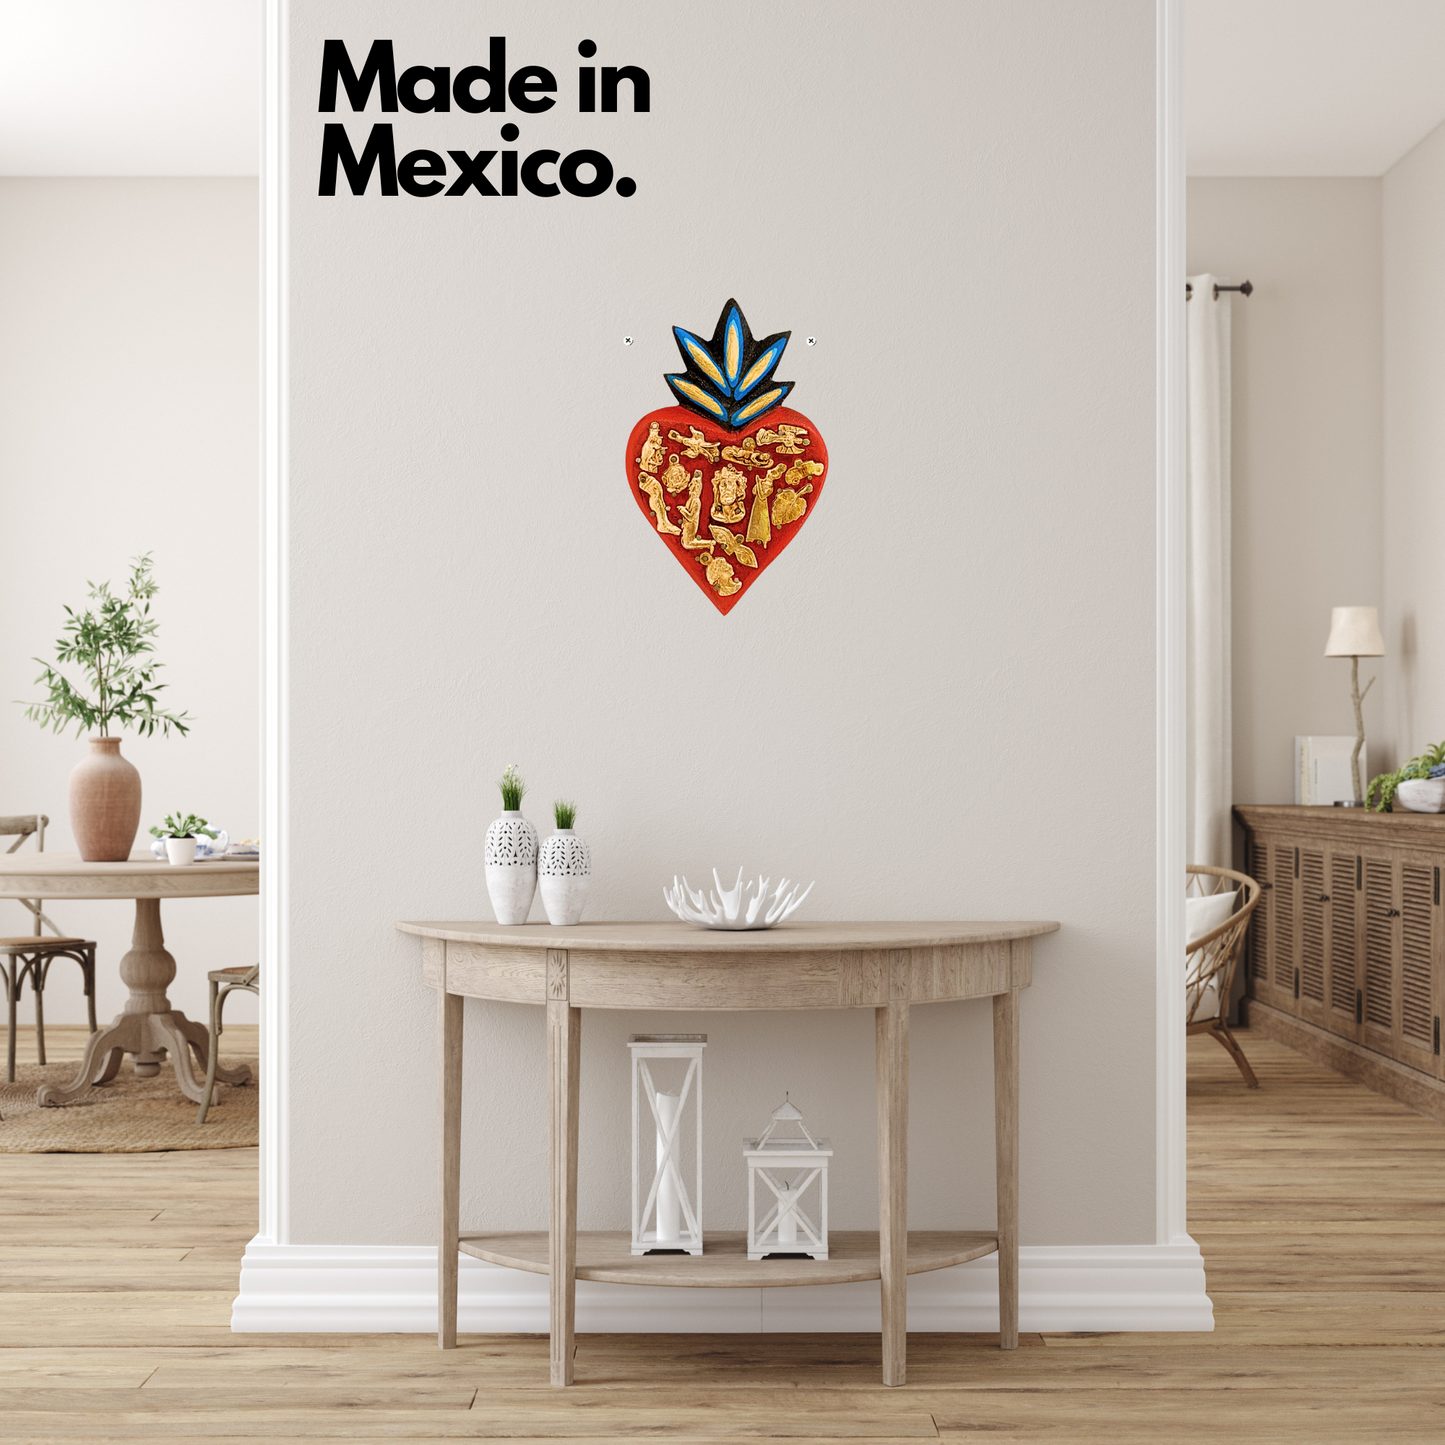 Ex Voto Wooden Sacred Heart with Milagros, handcrafted and hand-painted by Mexican artisans, brightens up any room with its vibrant colors on a wall